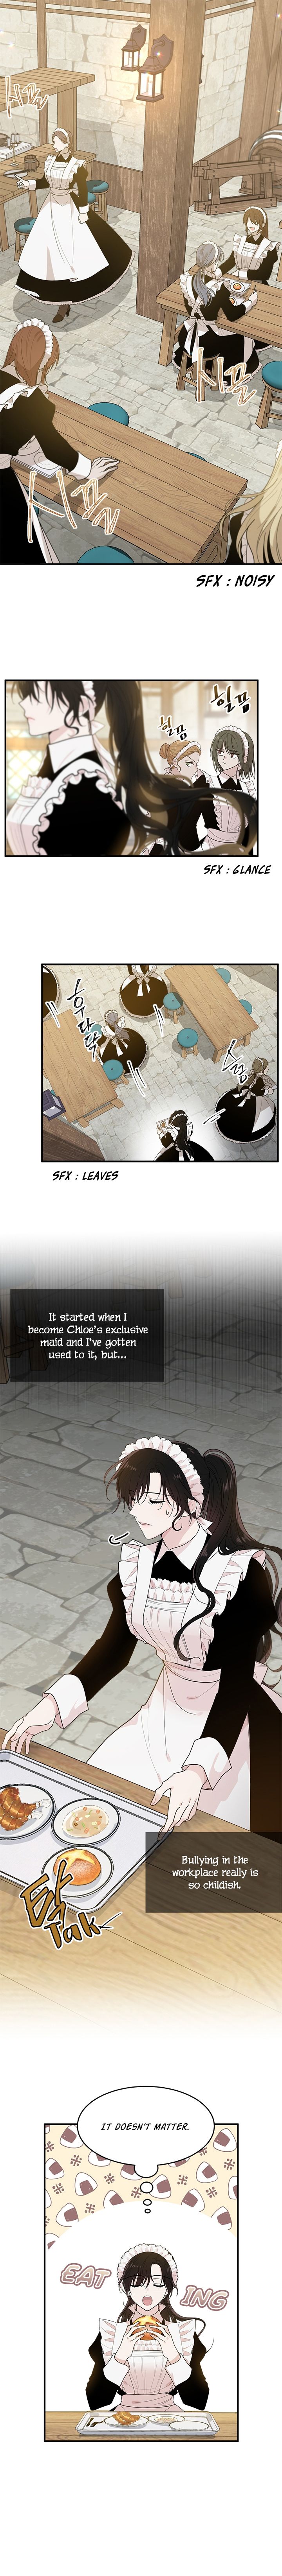 The Young Lady I Served Became A Young Master - Page 1